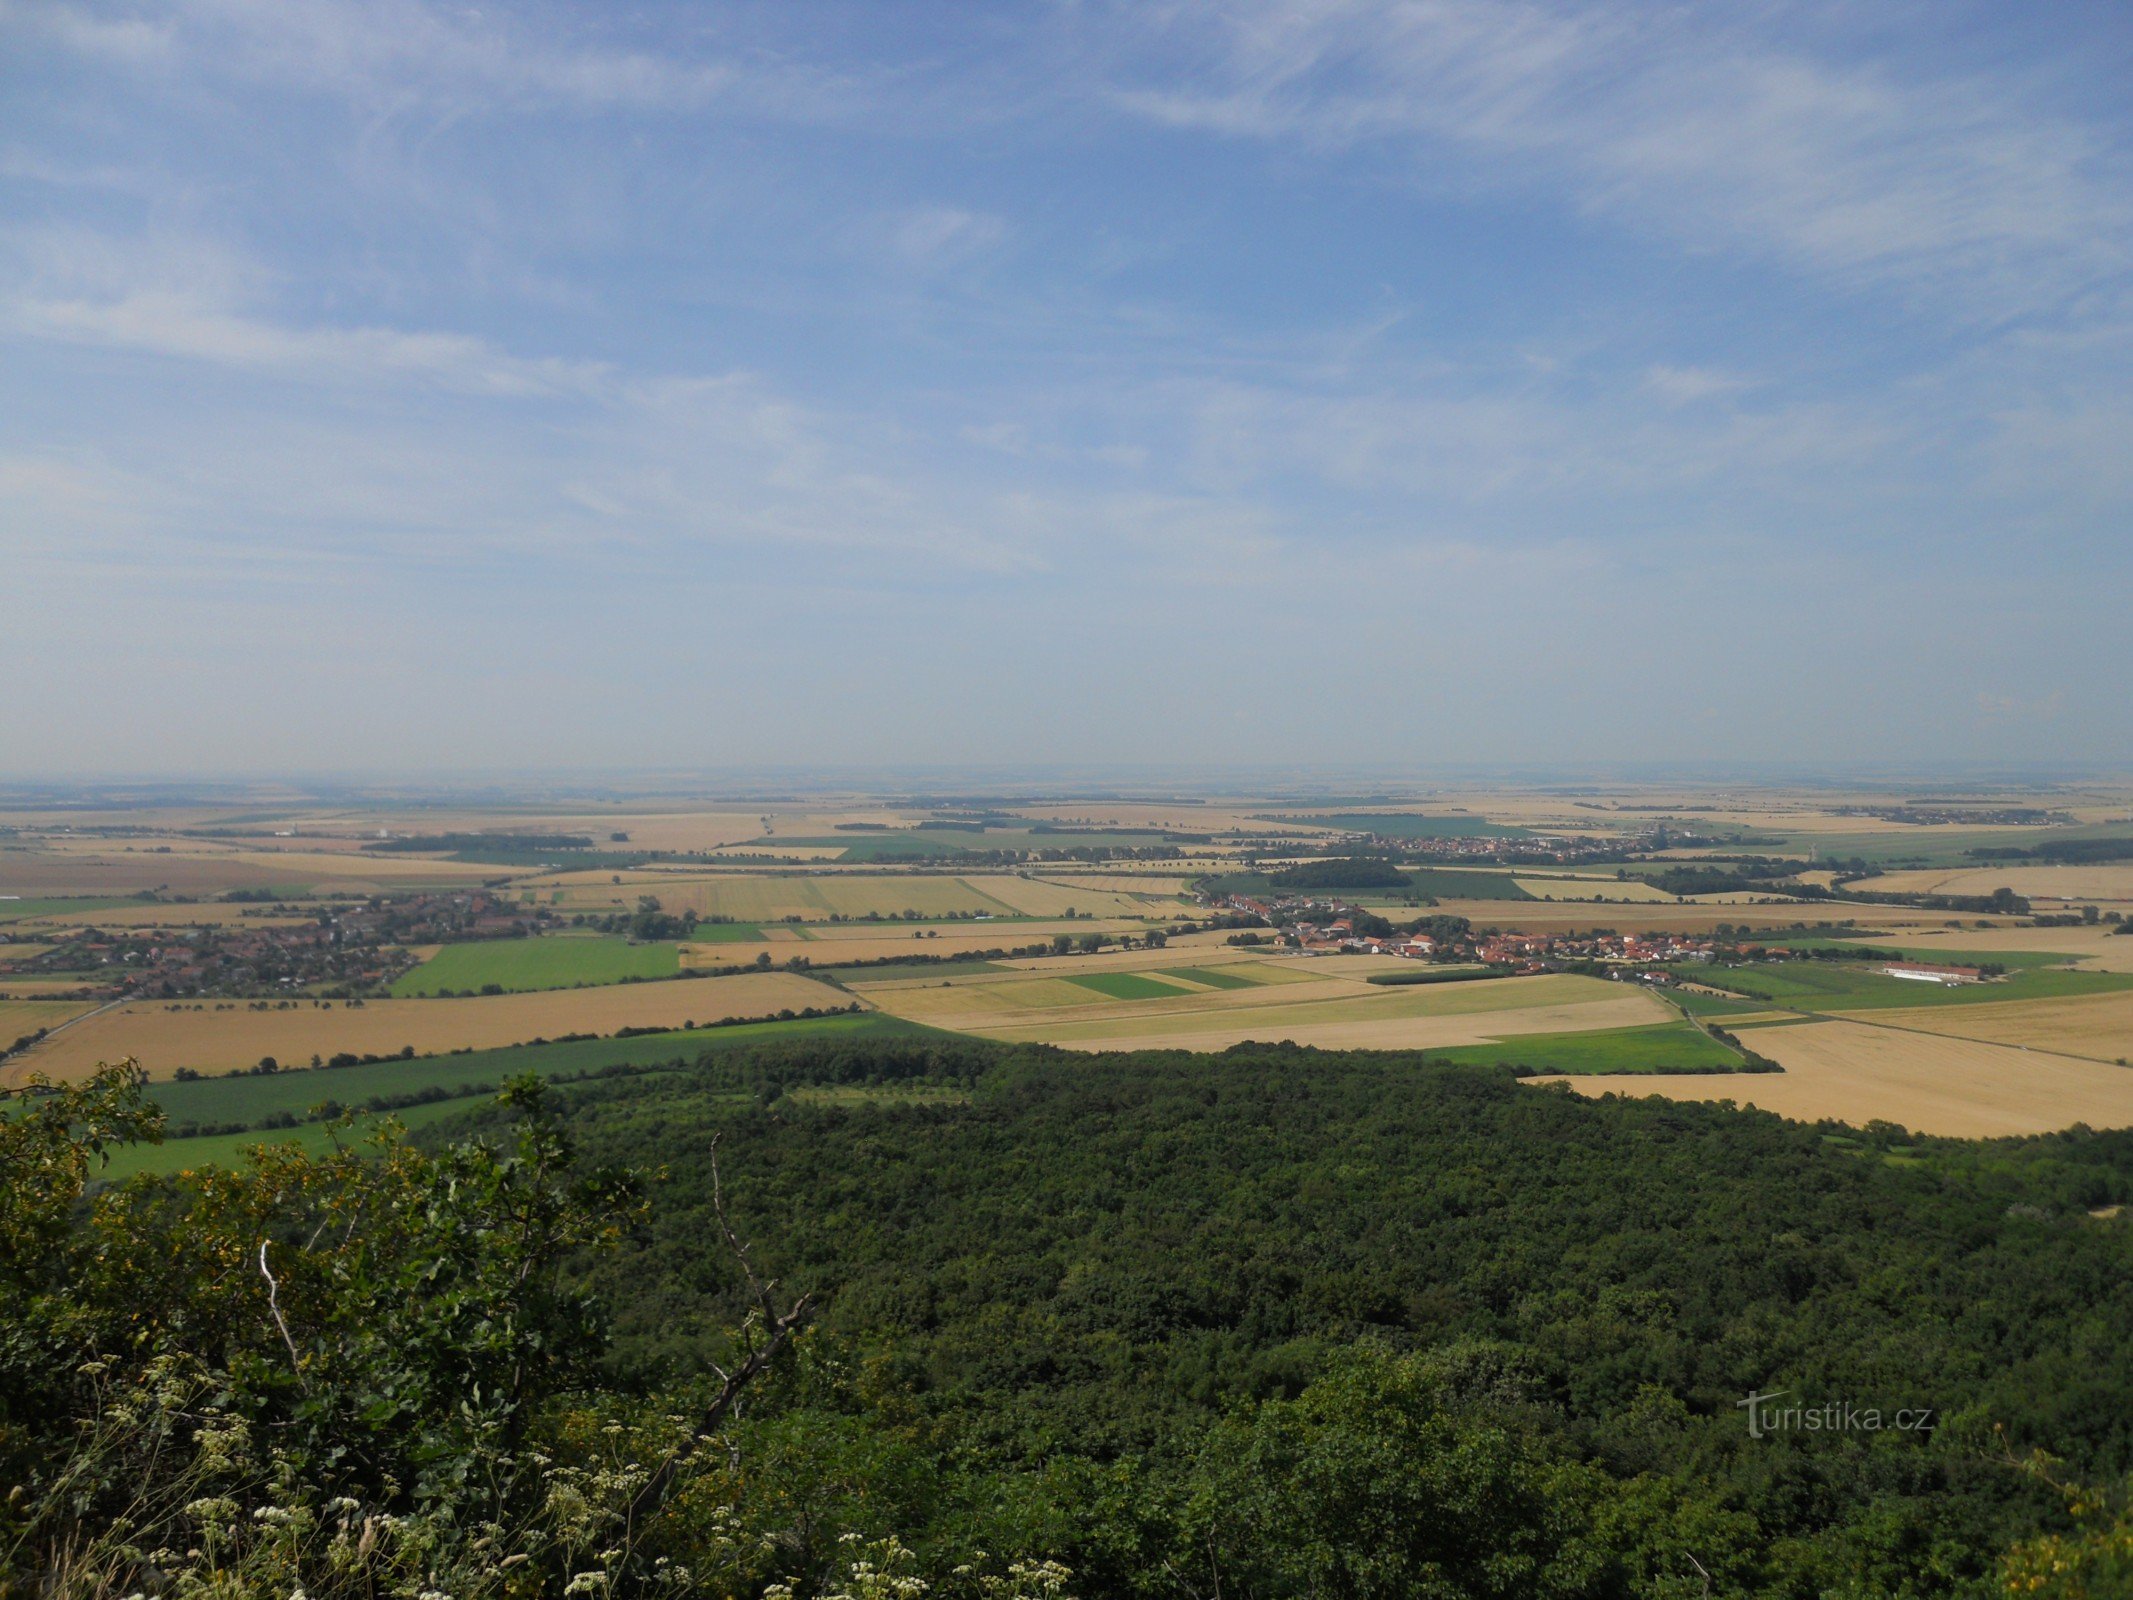 The view from Říp